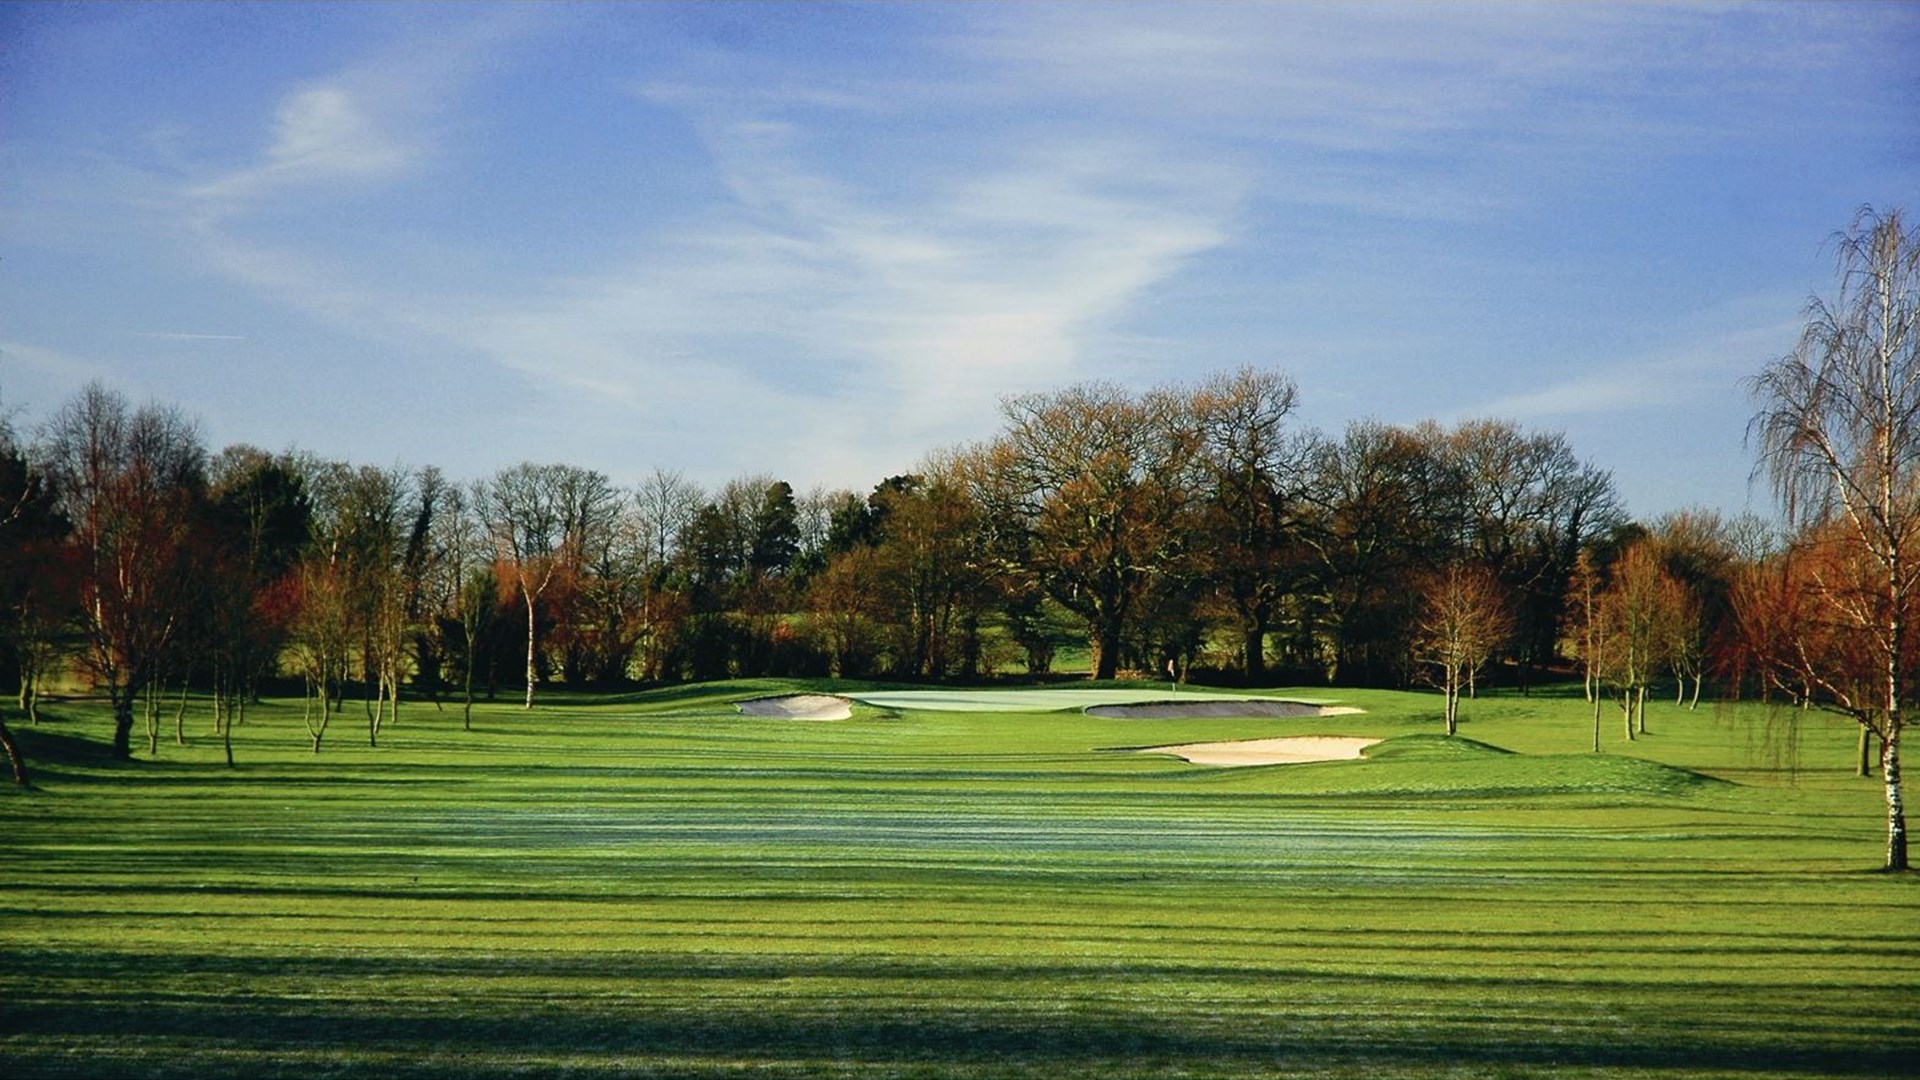 The Derby Course at The Belfry